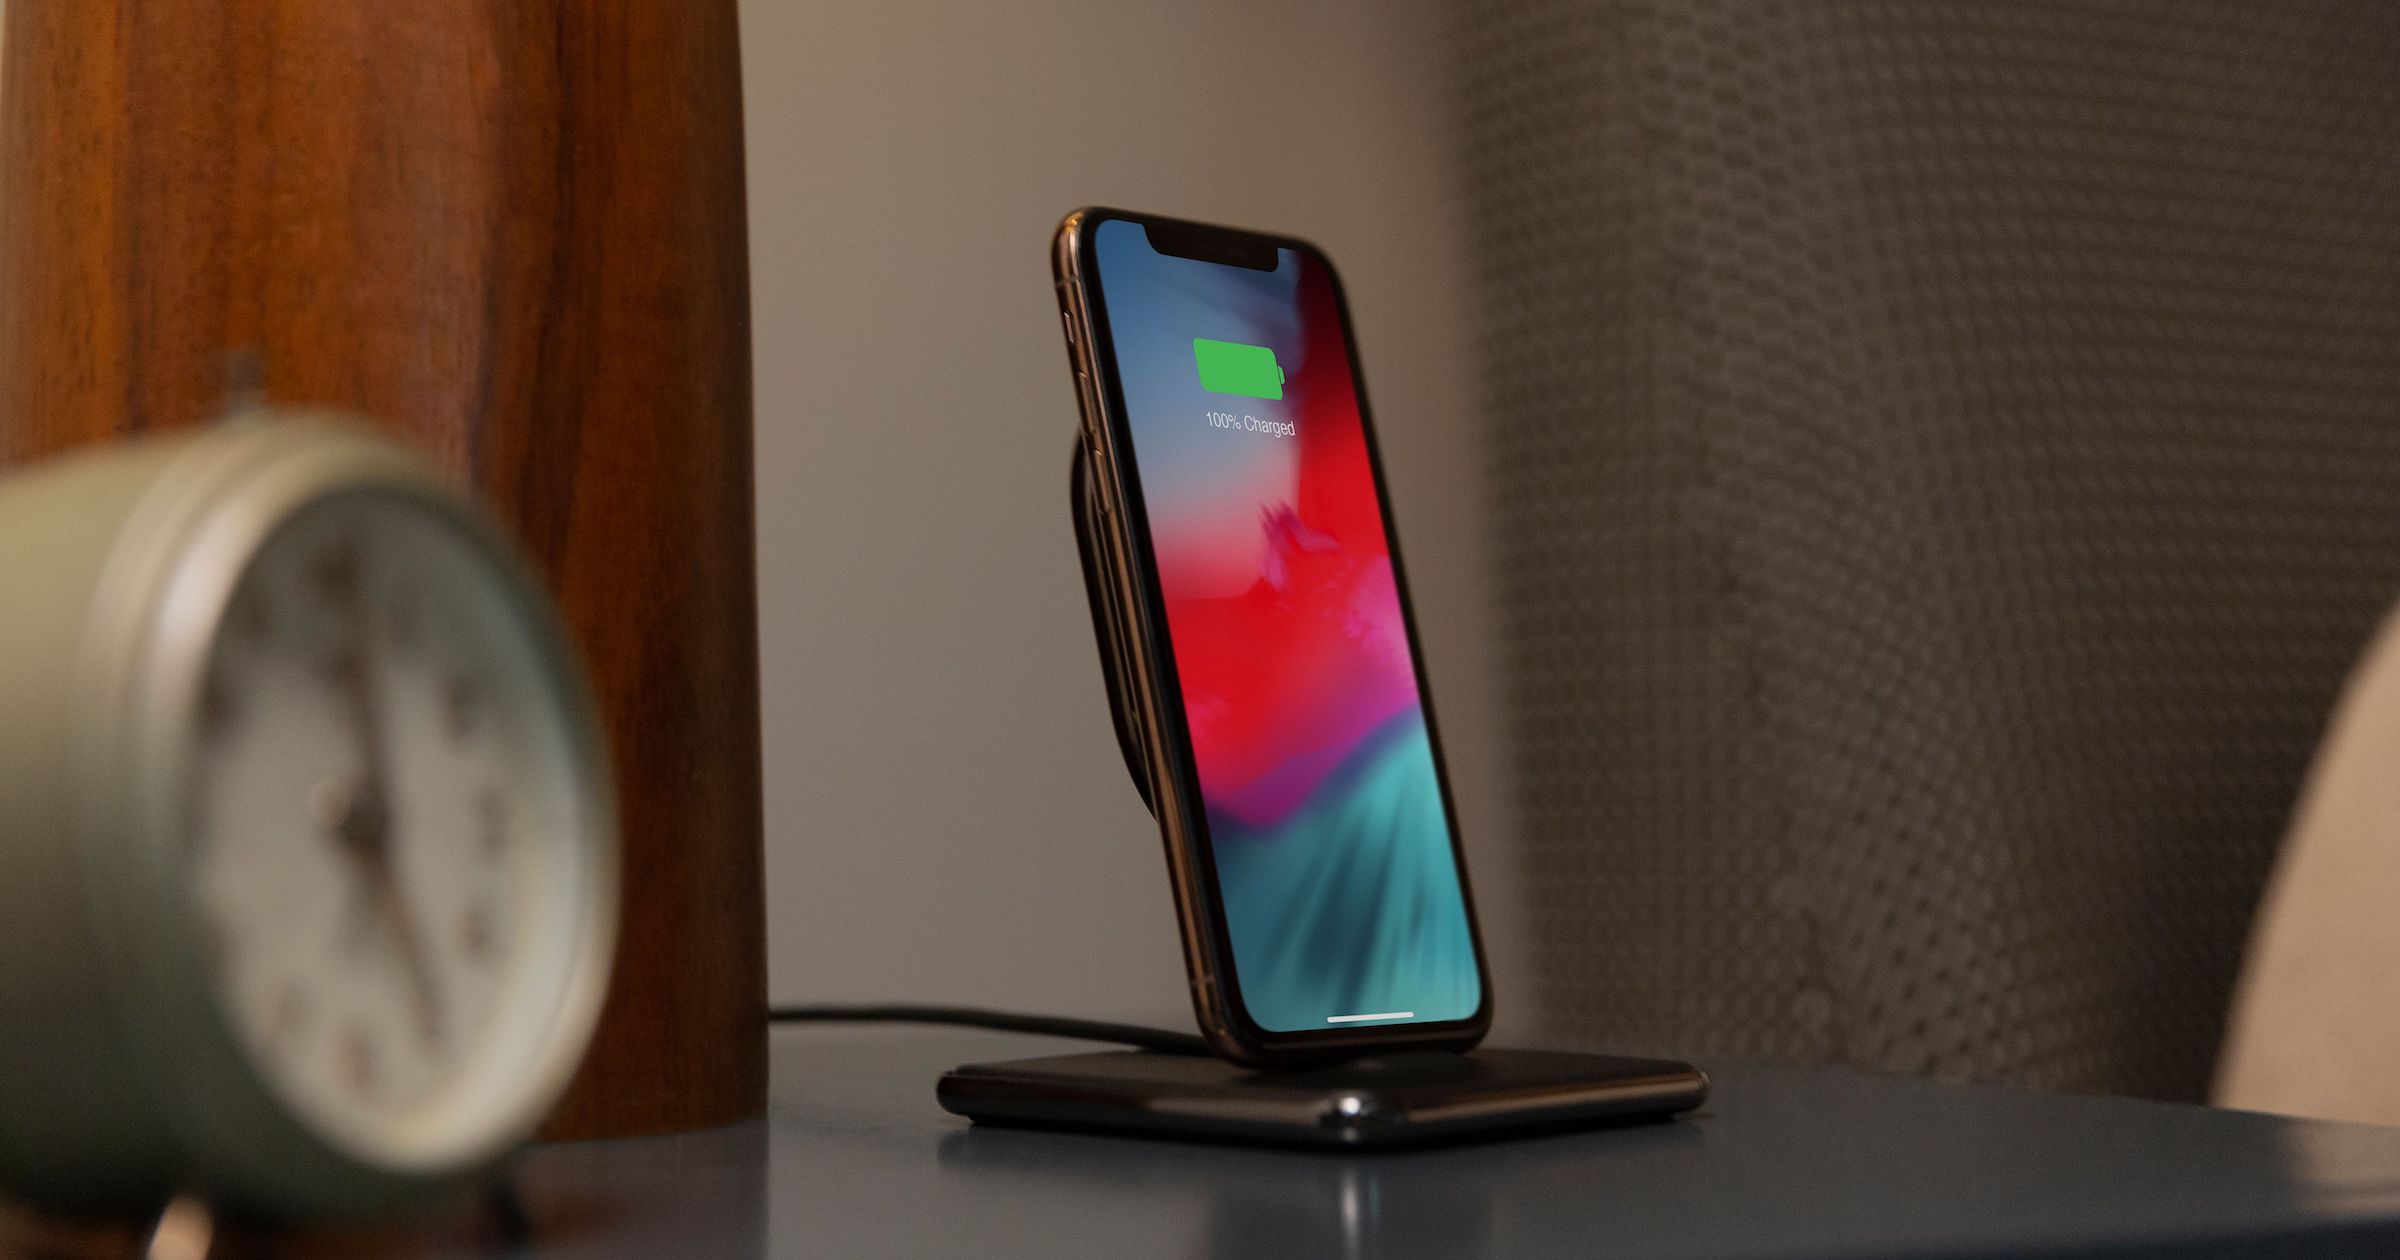 The Twelve South Hi-Rise Wireless Charger and Stand